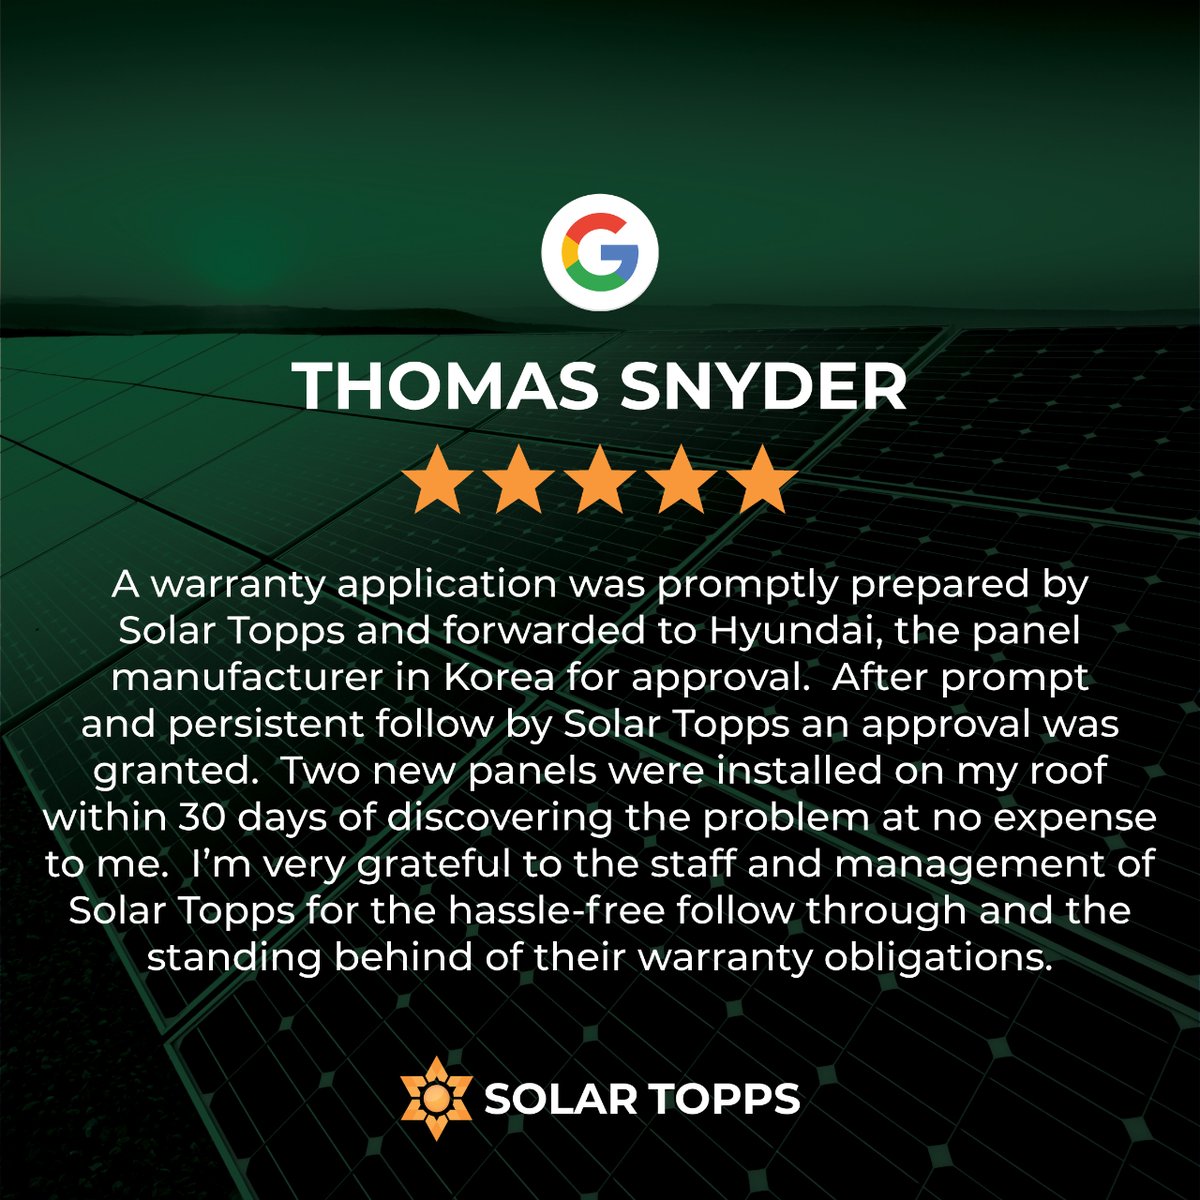 Ensuring peace of mind one warranty at a time ☀️ When it comes to solar, trust in Solar Topps to have your back when warranty issues arise. Your solar journey is our priority! #solartopps #testimonialtuesday #sustainableenergy #solarpanels #solarinstallation #arizonabusiness